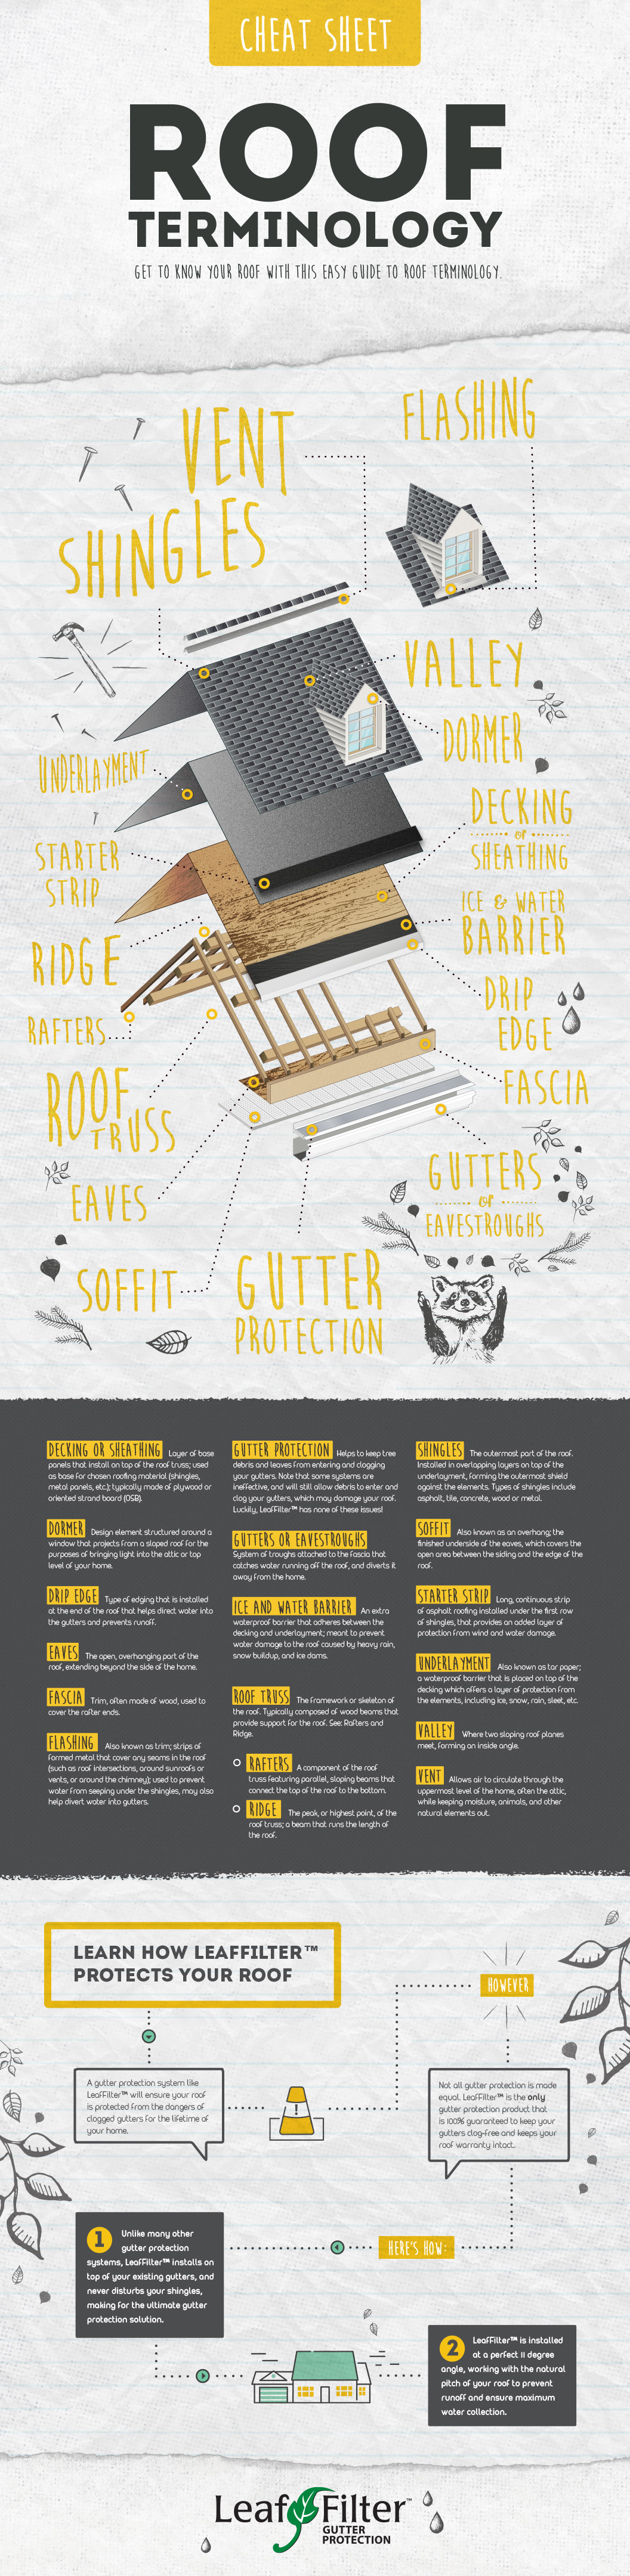 Roof terminology cheat sheet infographic